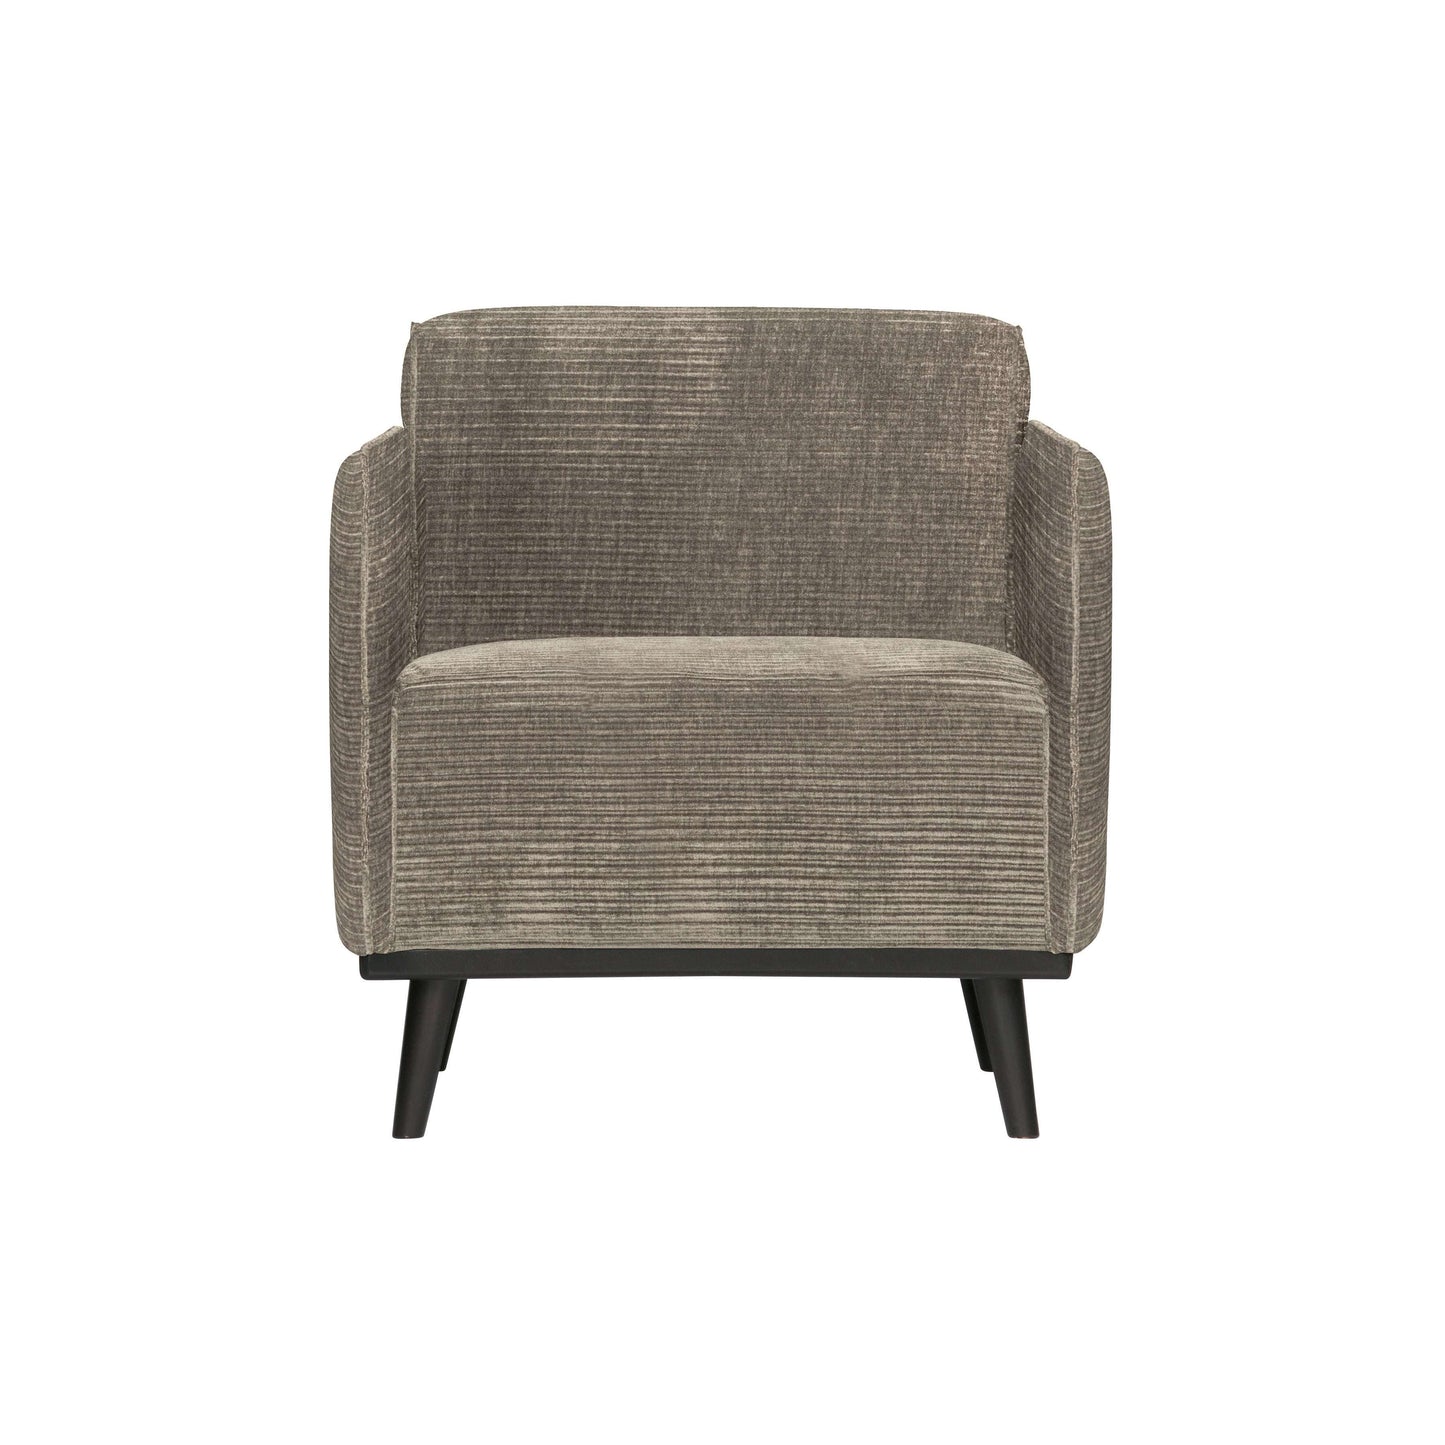 BePureHome Statement fauteuil met arm taupe